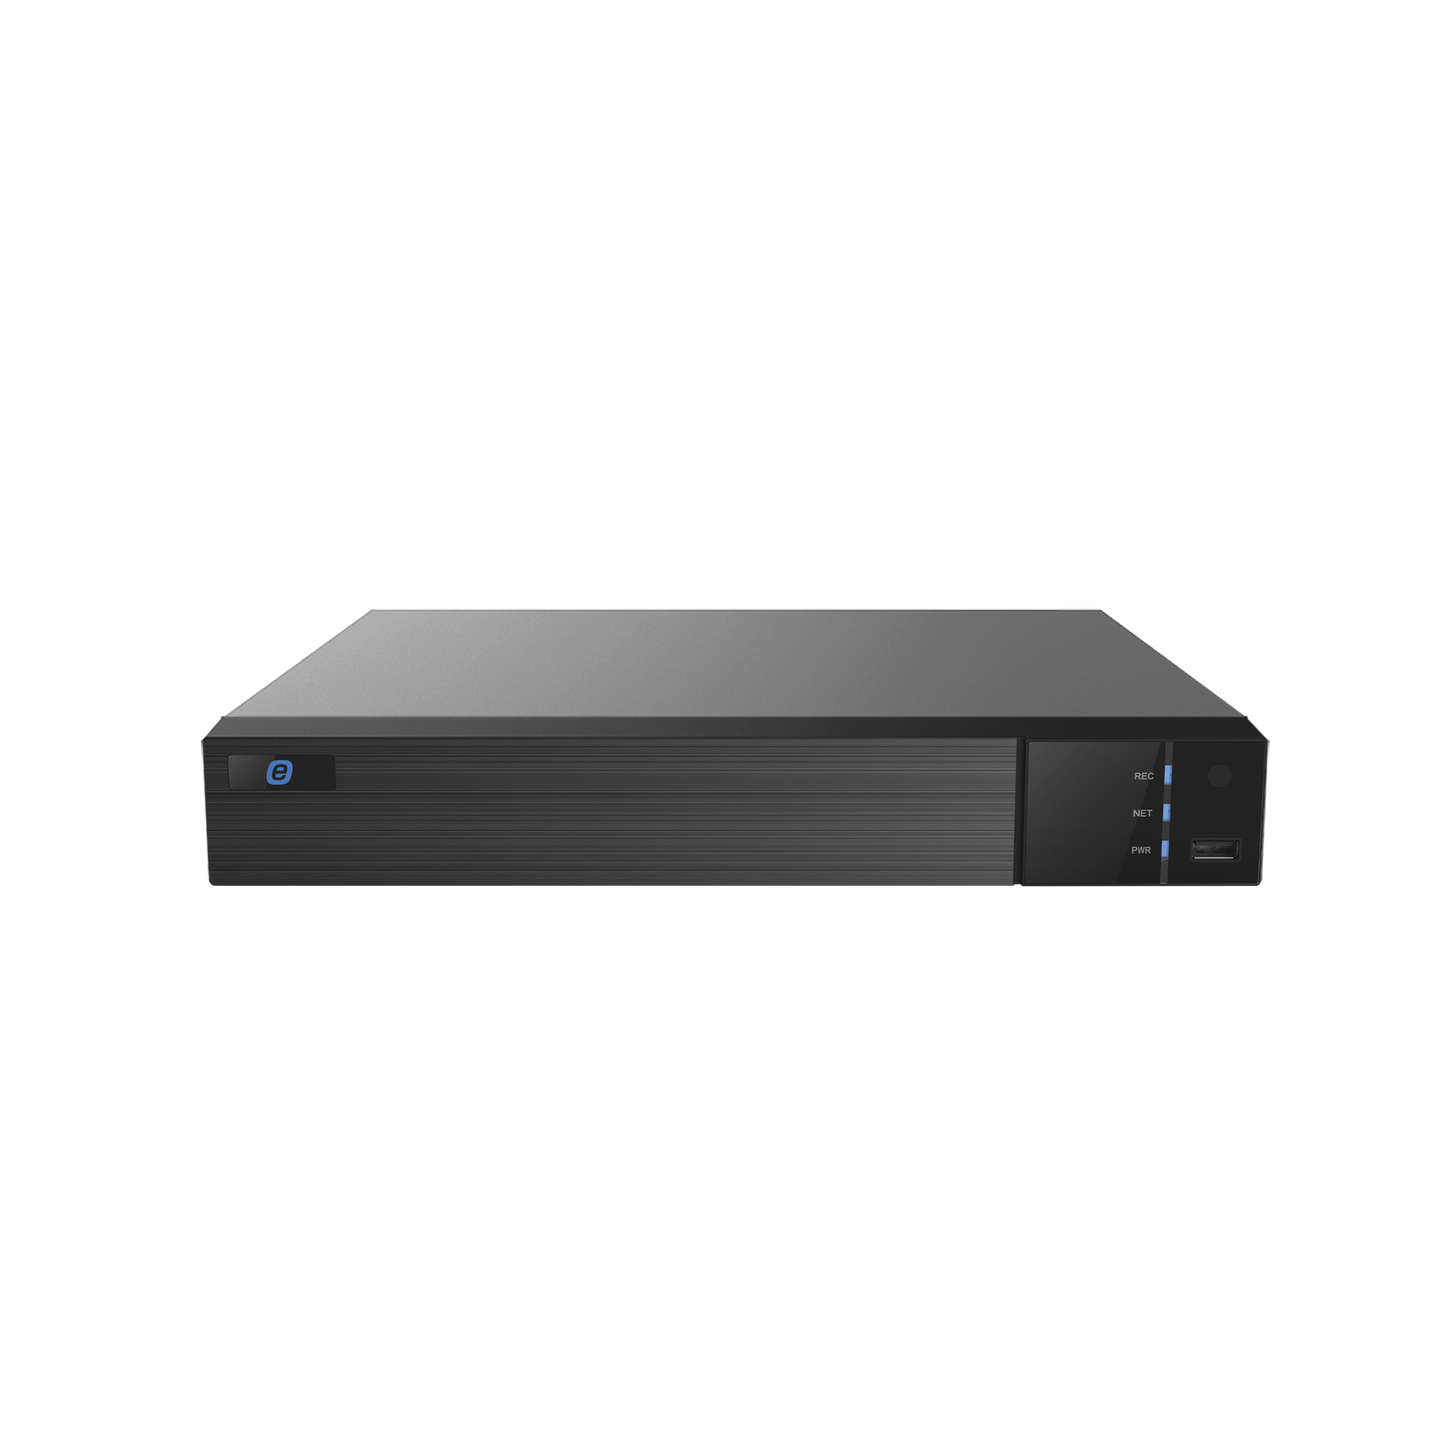 DVR 5MP / 8 Channels TURBOHD + 4 Channels IP / Support 1 Hard Disk / Video Outpout FULL HD / H.265 / AHD, TVI, CVBS, CVI / 8 Channels Audio / Audio by Coaxitron / Cloud Video Recording